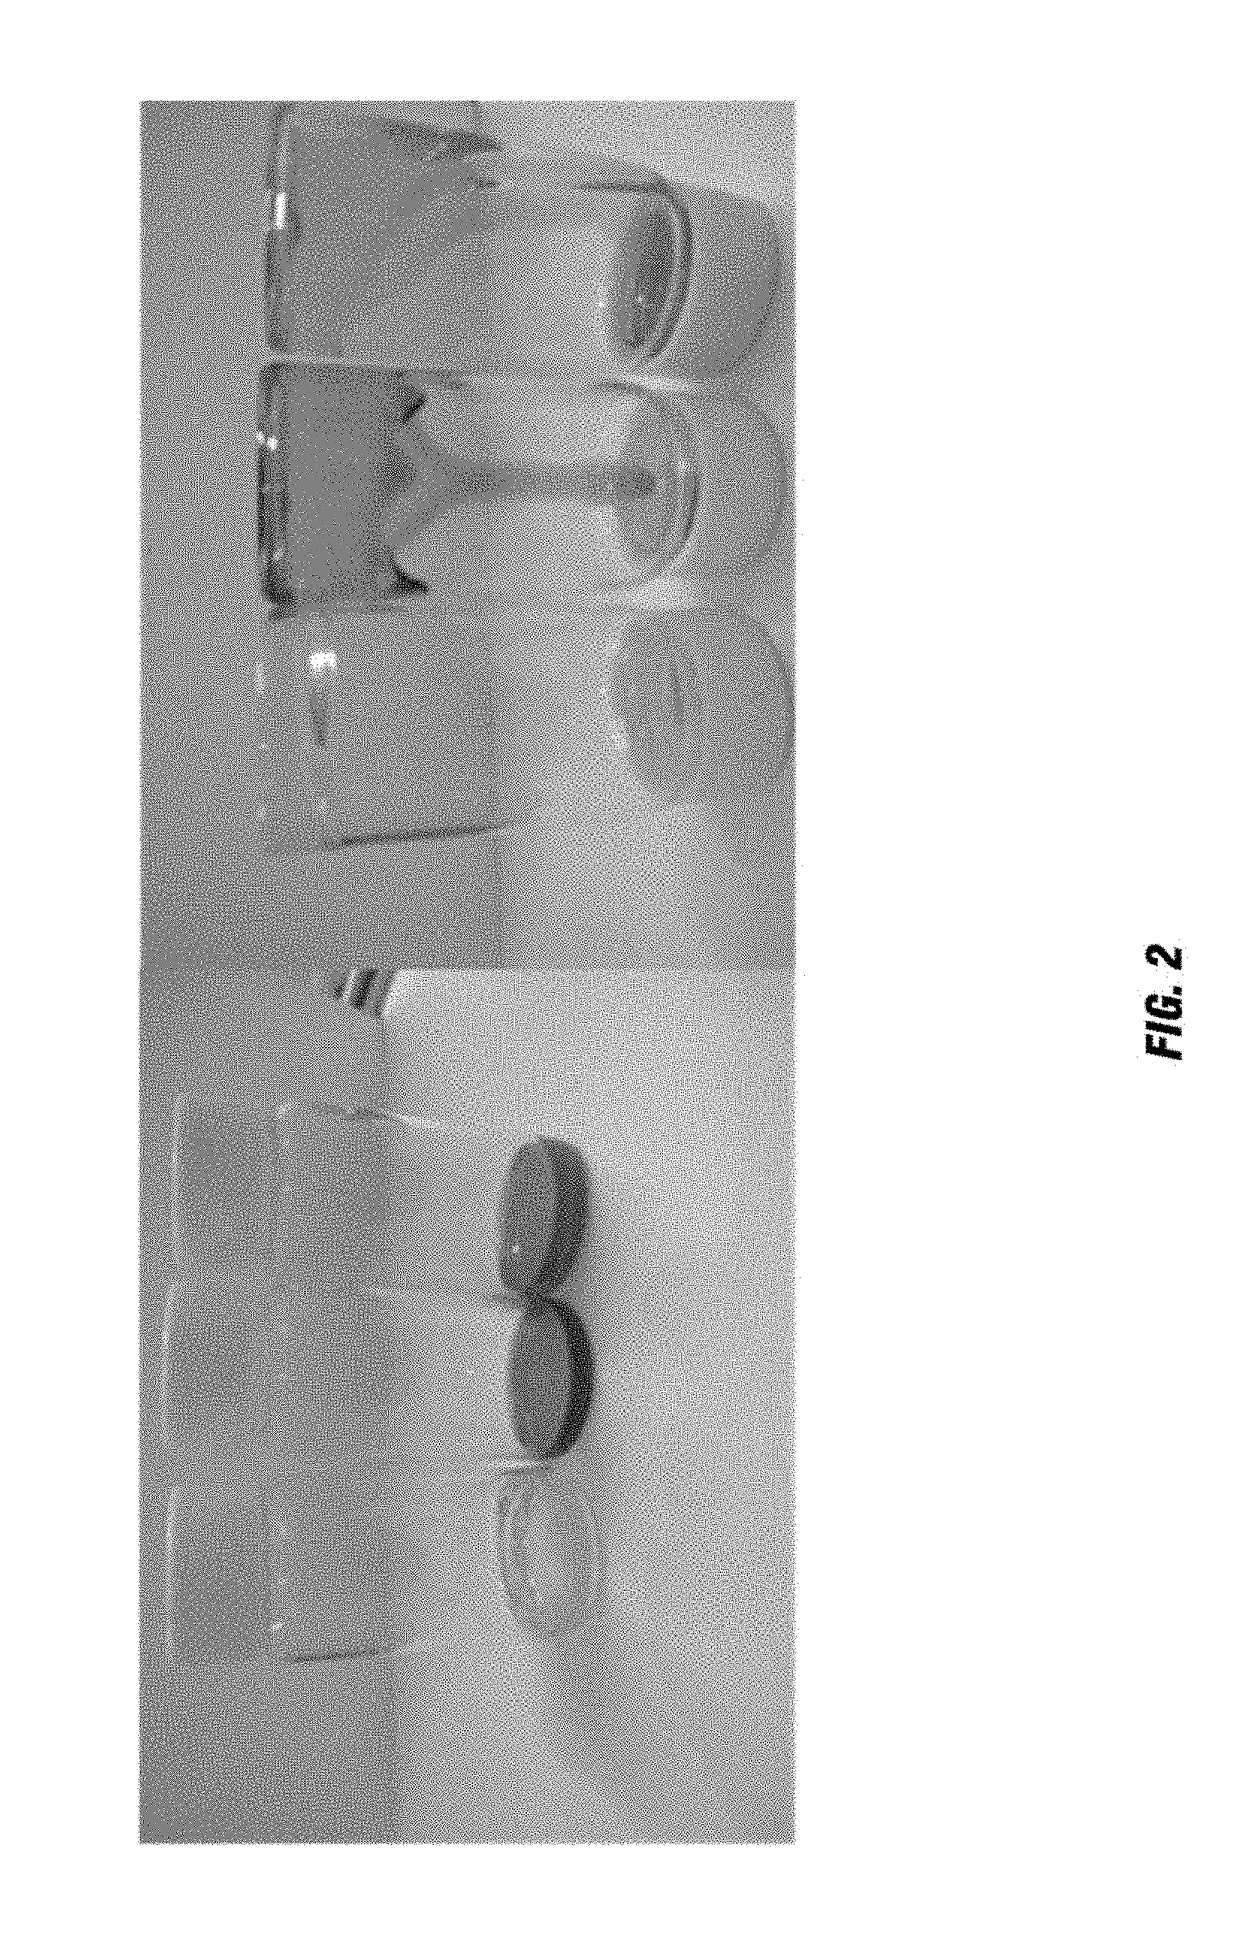 Rapid preconcentration of viable bacteria using magnetic ionic liquid for PCR amplification and culture-based diagnostics